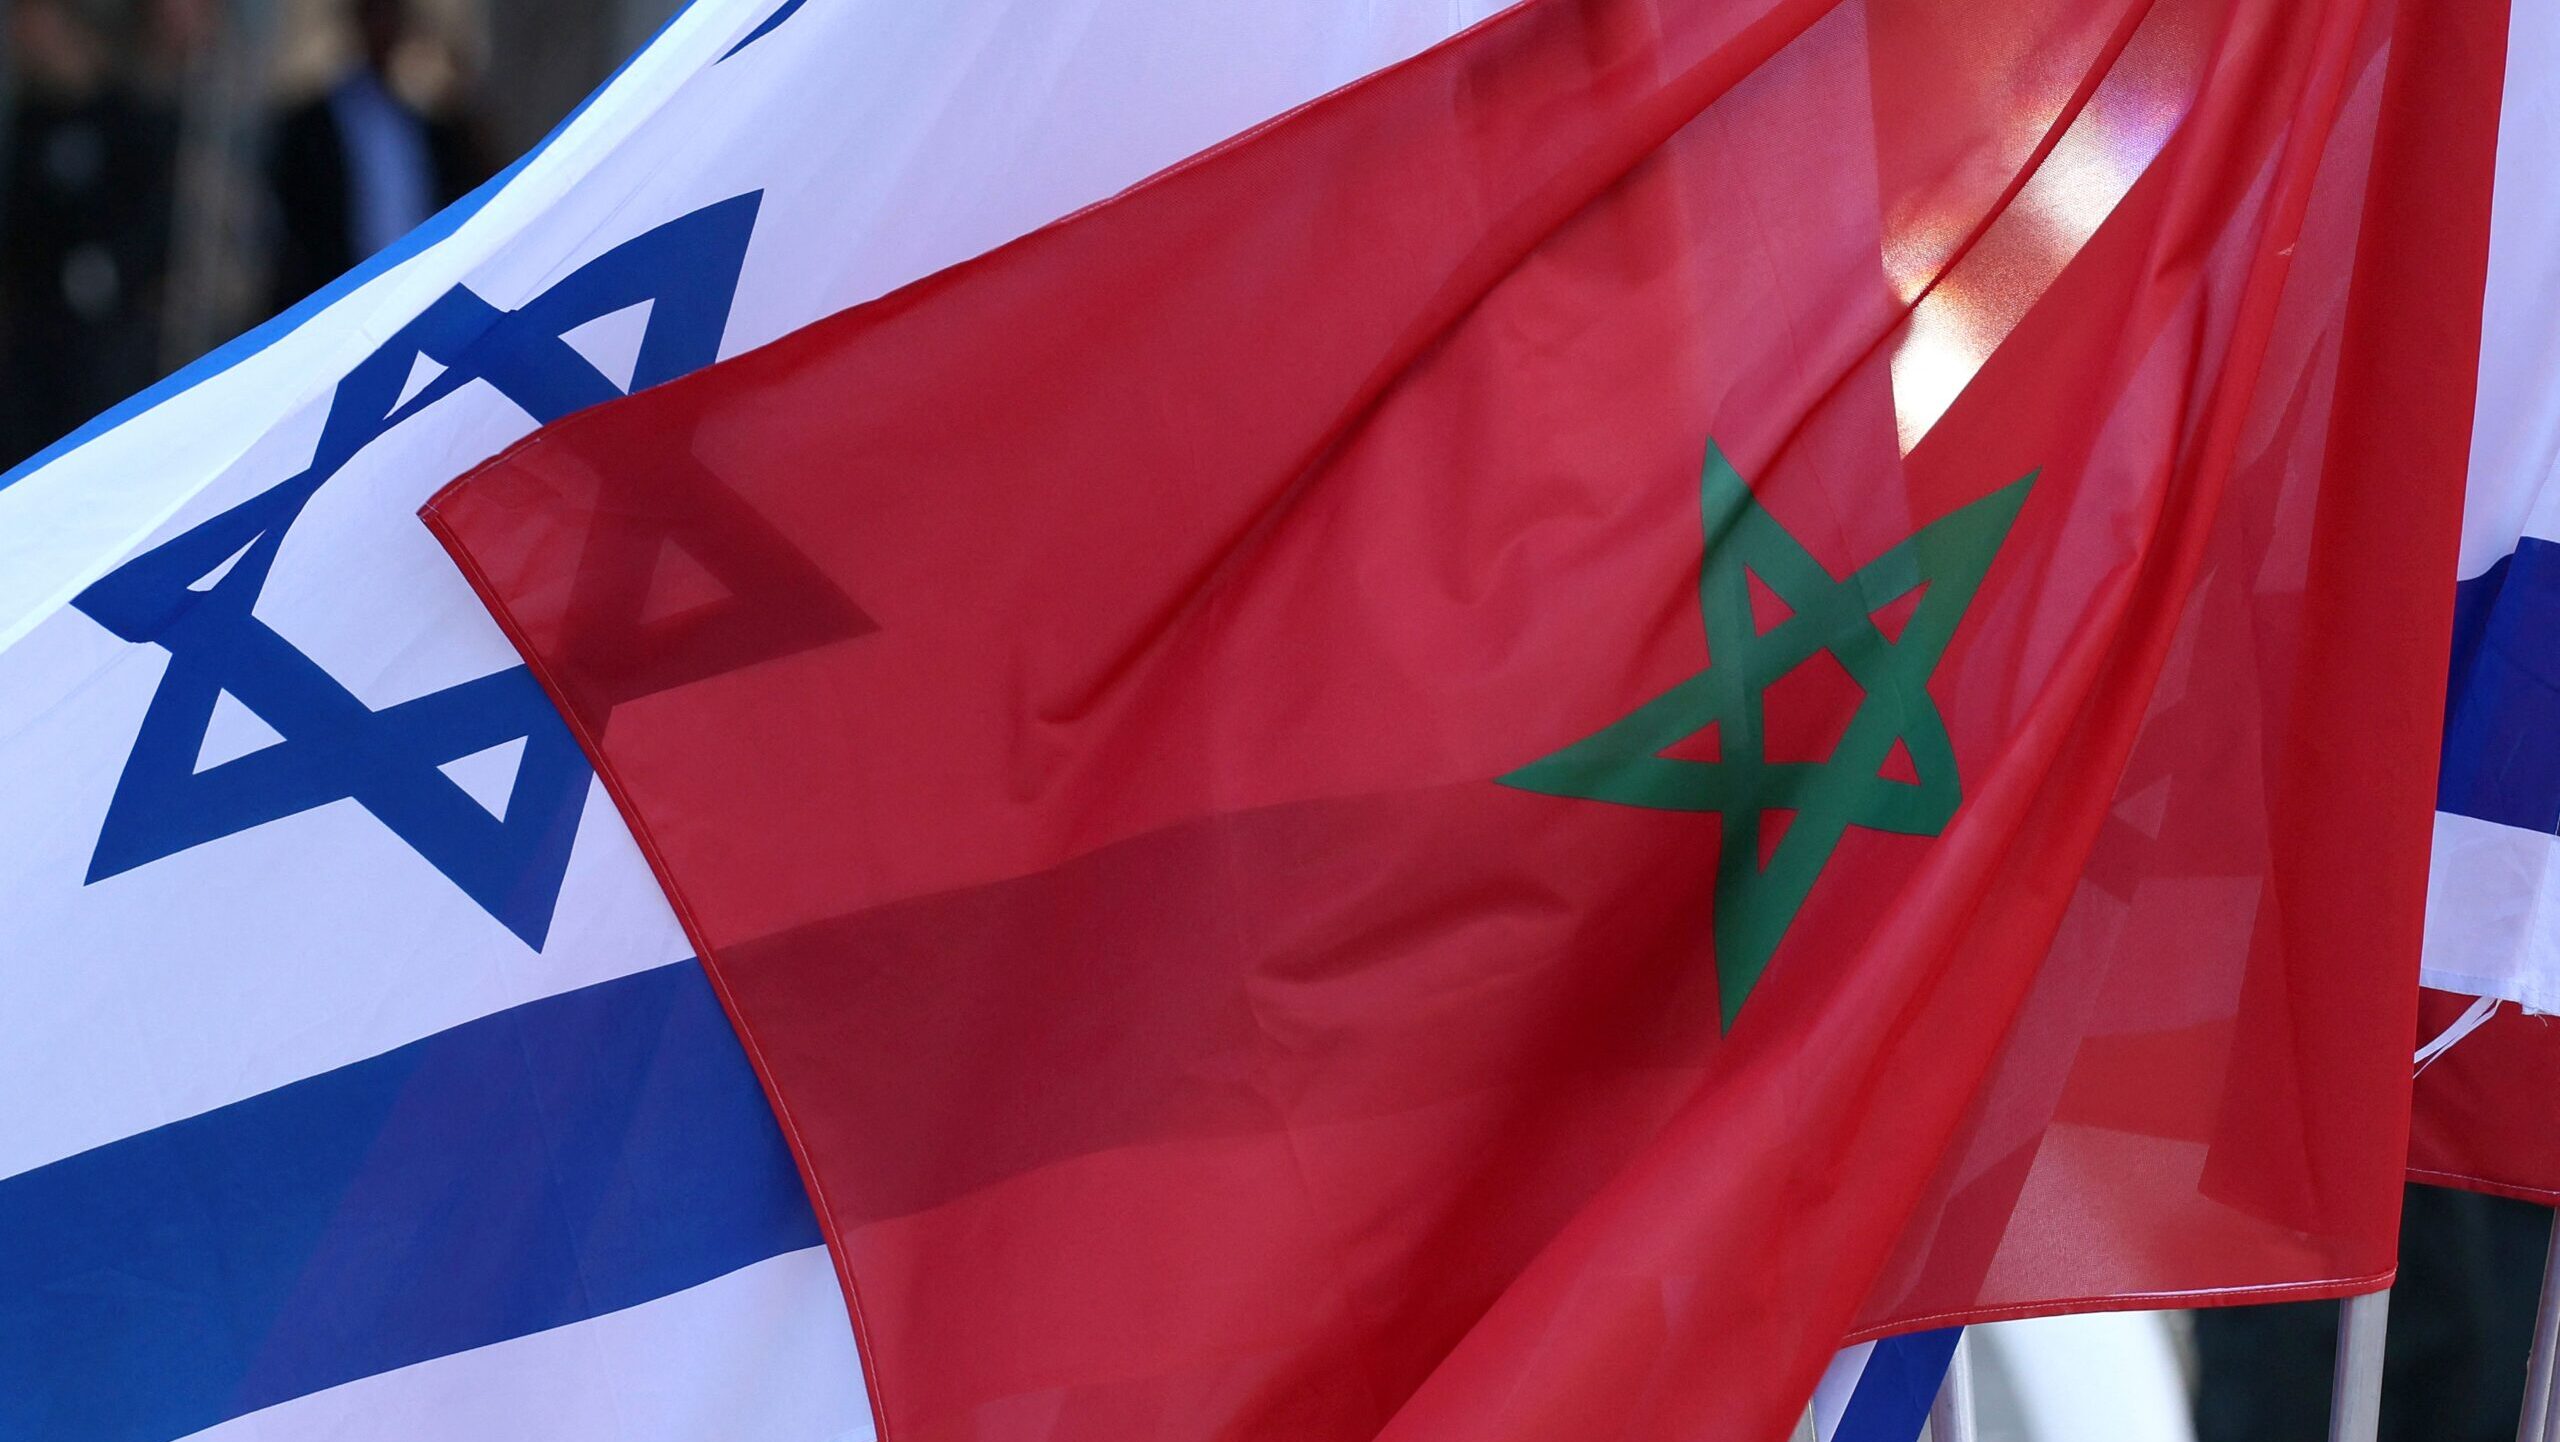 Media Bias Strains Moroccan-Israeli Relations as Government Outlets Seek Objectivity